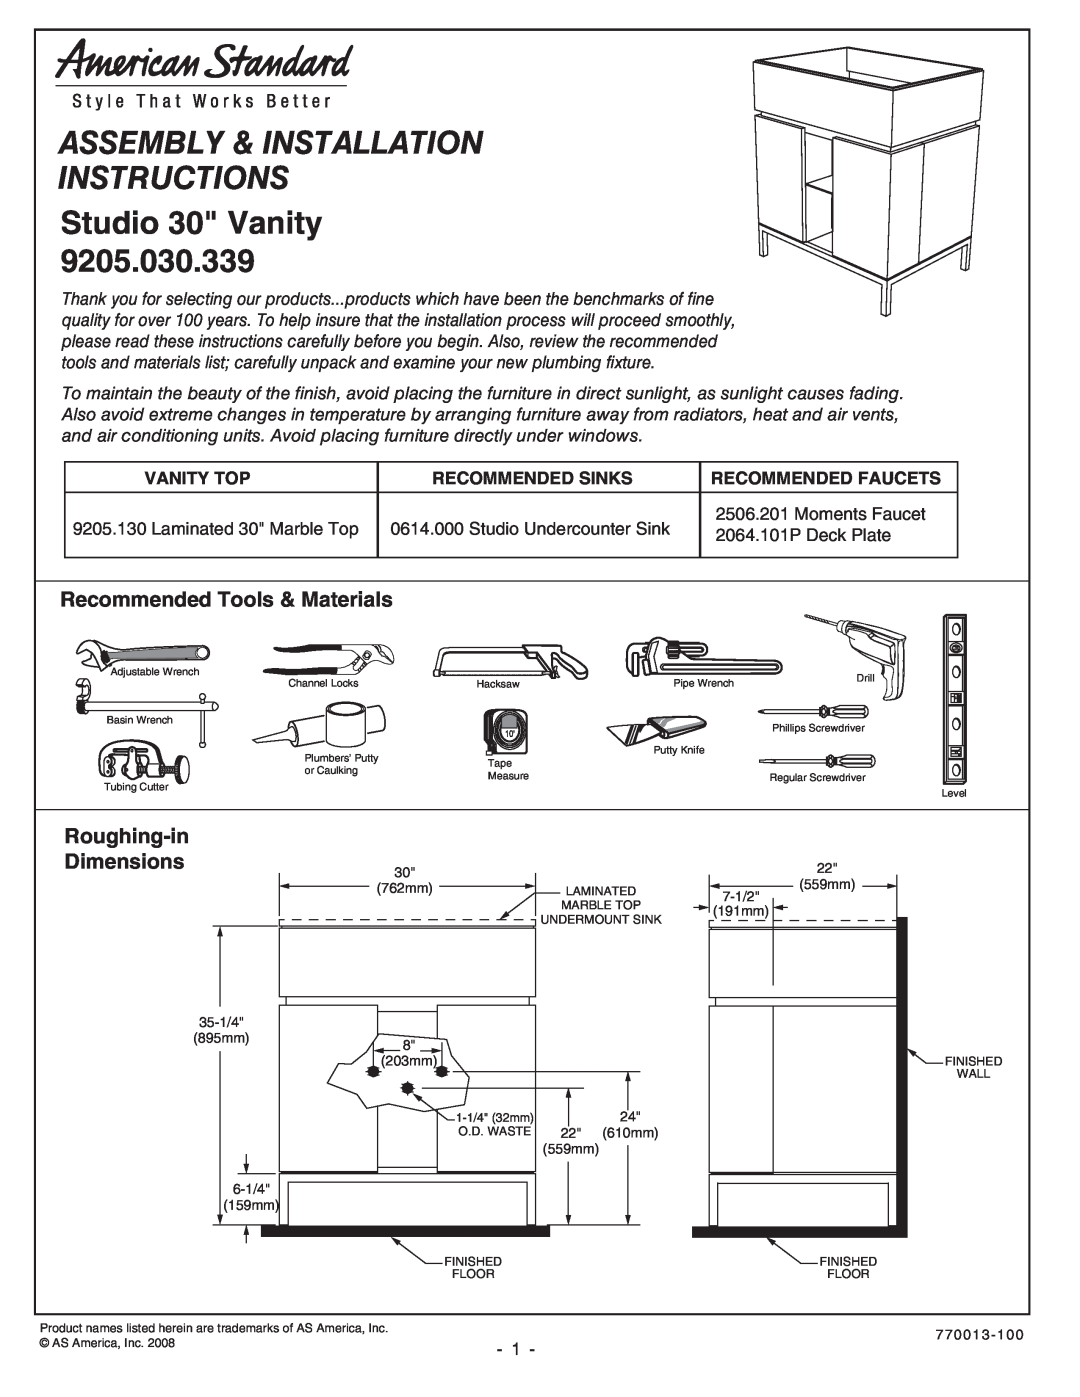 American Standard 9205.030.339 installation instructions Recommended Tools & Materials, Roughing-in Dimensions, Vanity Top 